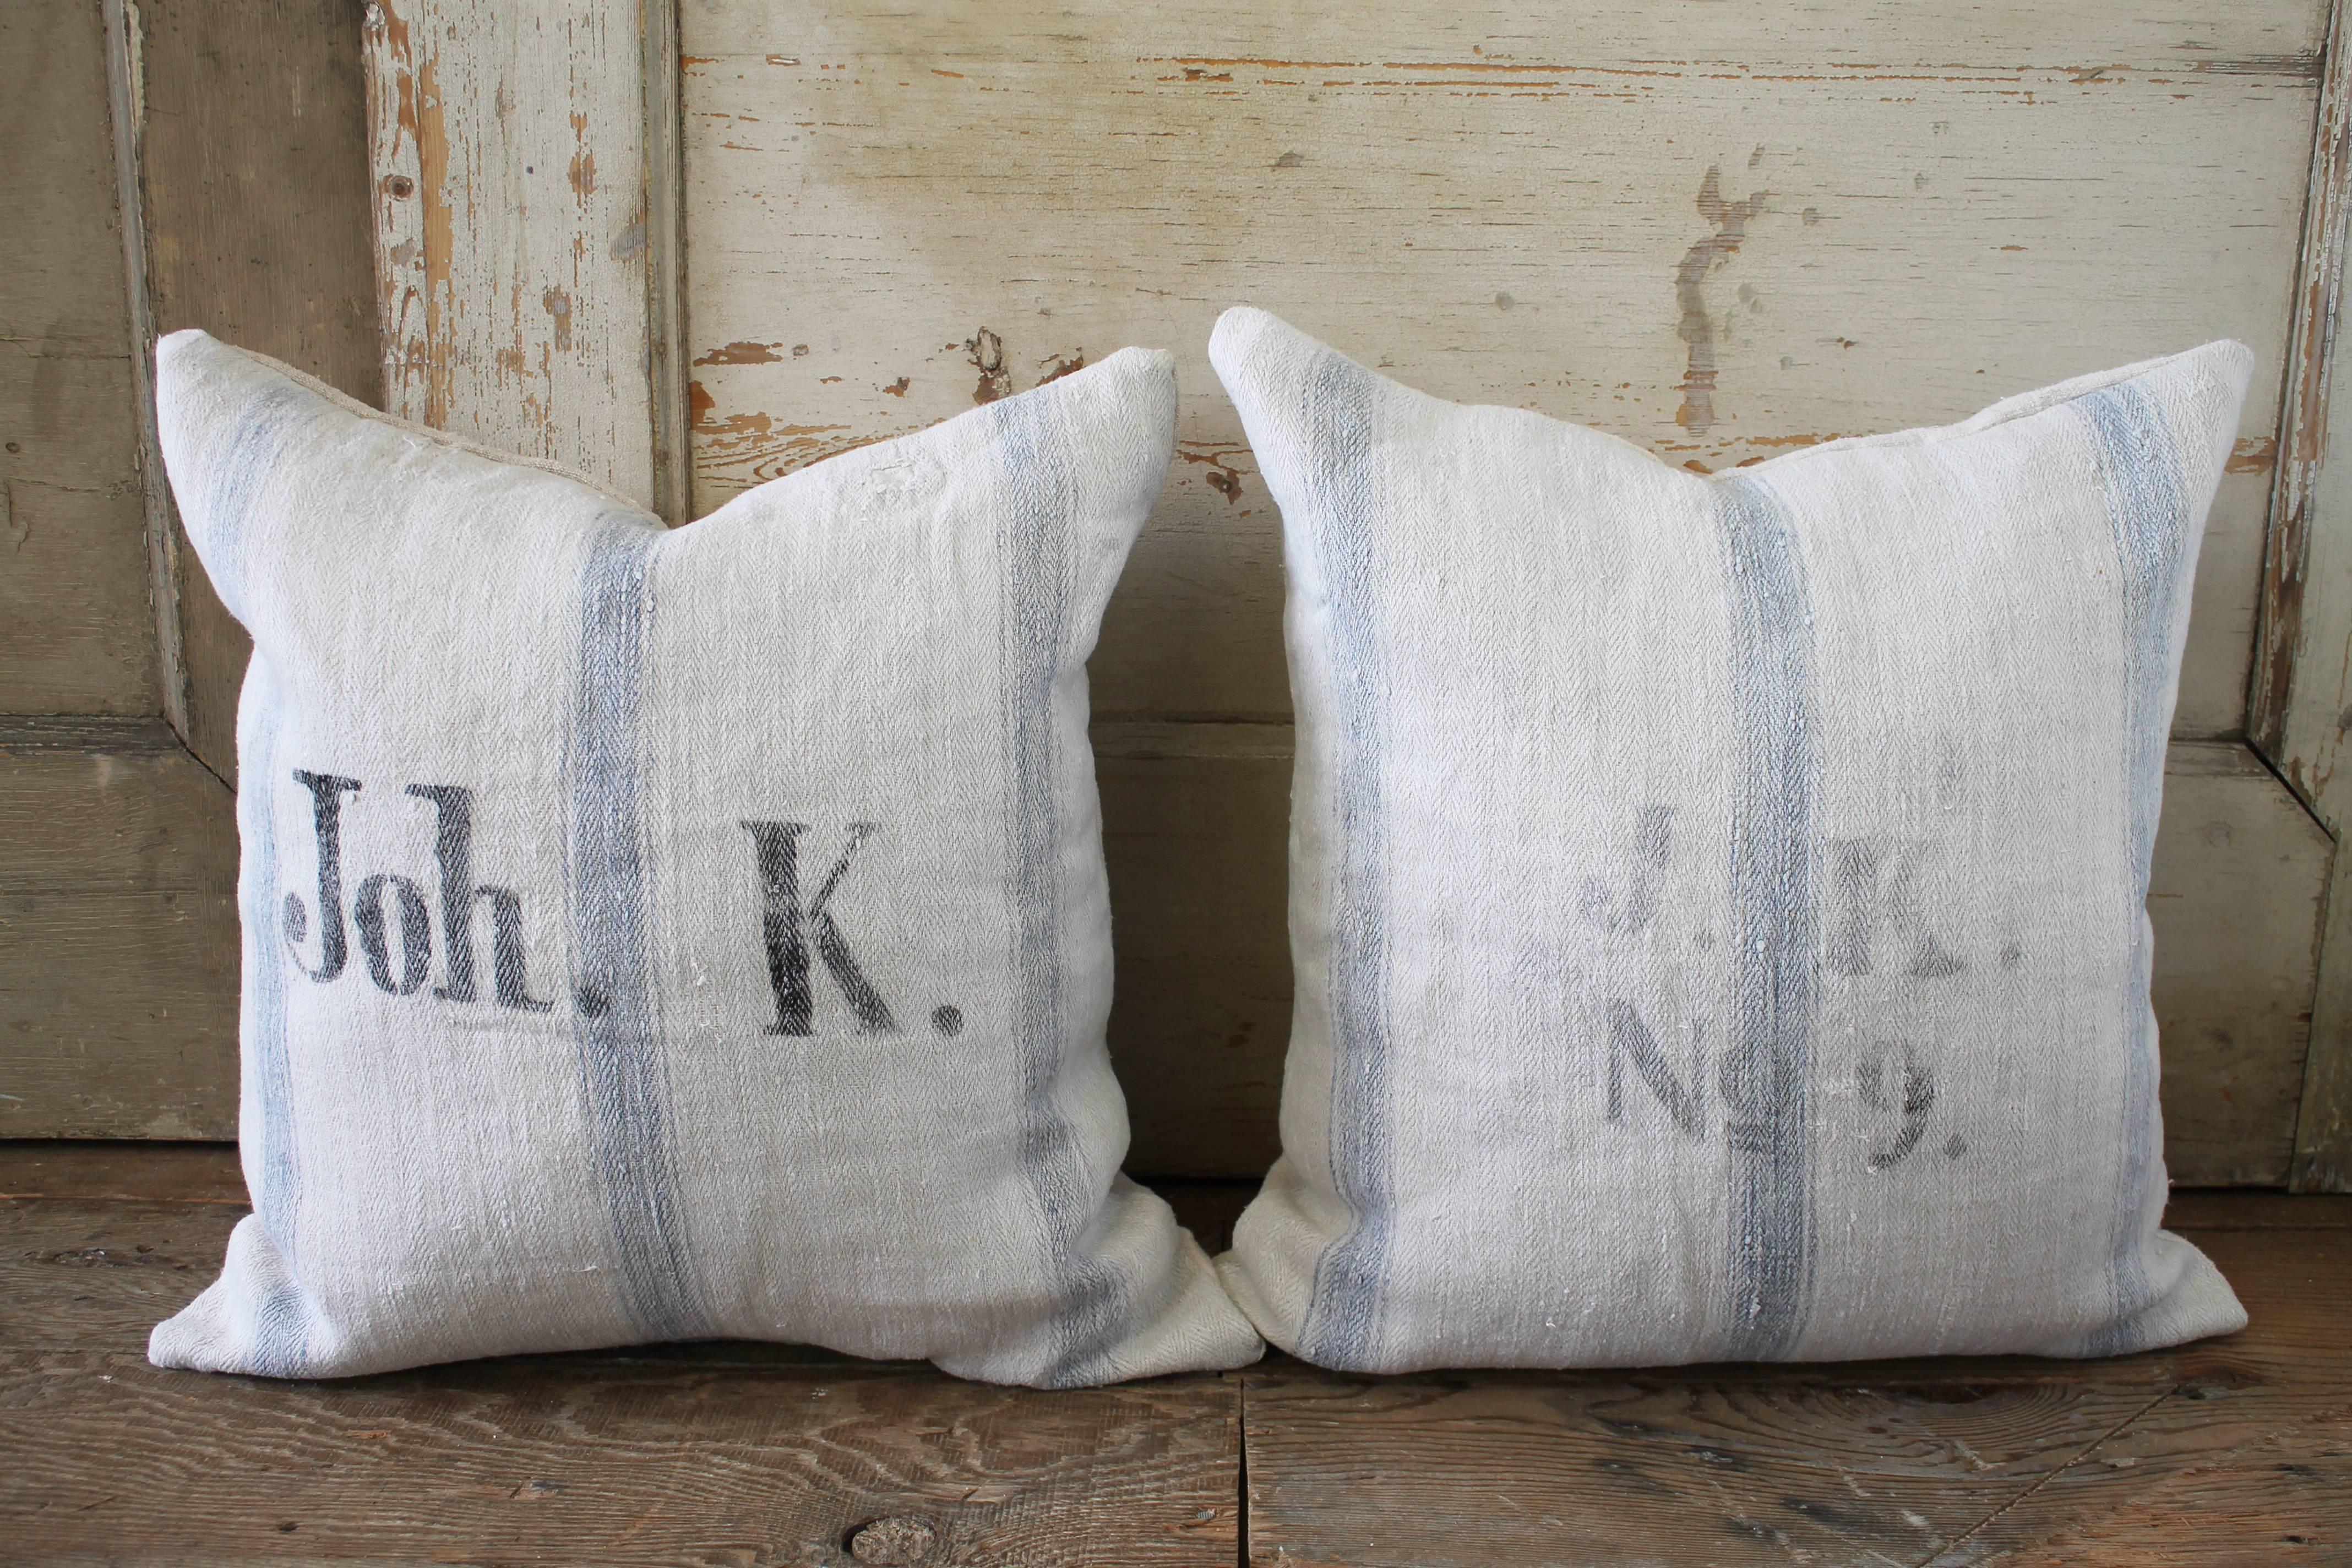 Lovely pair of grain feed sack pillows from Europe. We custom-made these out of the original antique feed sacks, with zipper closure and overlocked edges.
The fronts are a soft pale oatmeal color with pale Swedish blue stripes and original